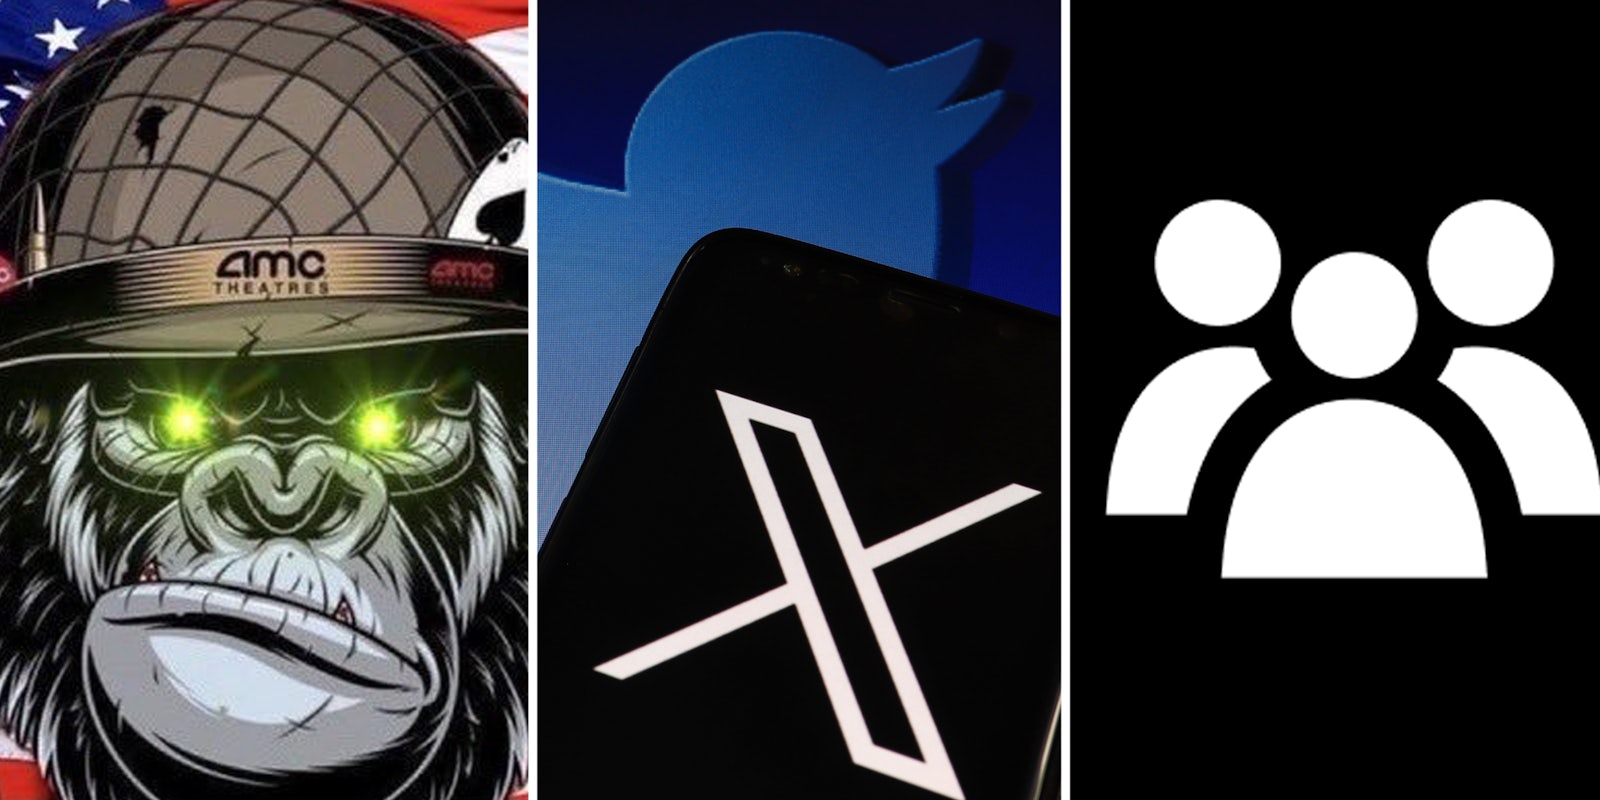 Ape in army helmet(l), X app on phone with twitter logo in background(c), Three simple figures(r)